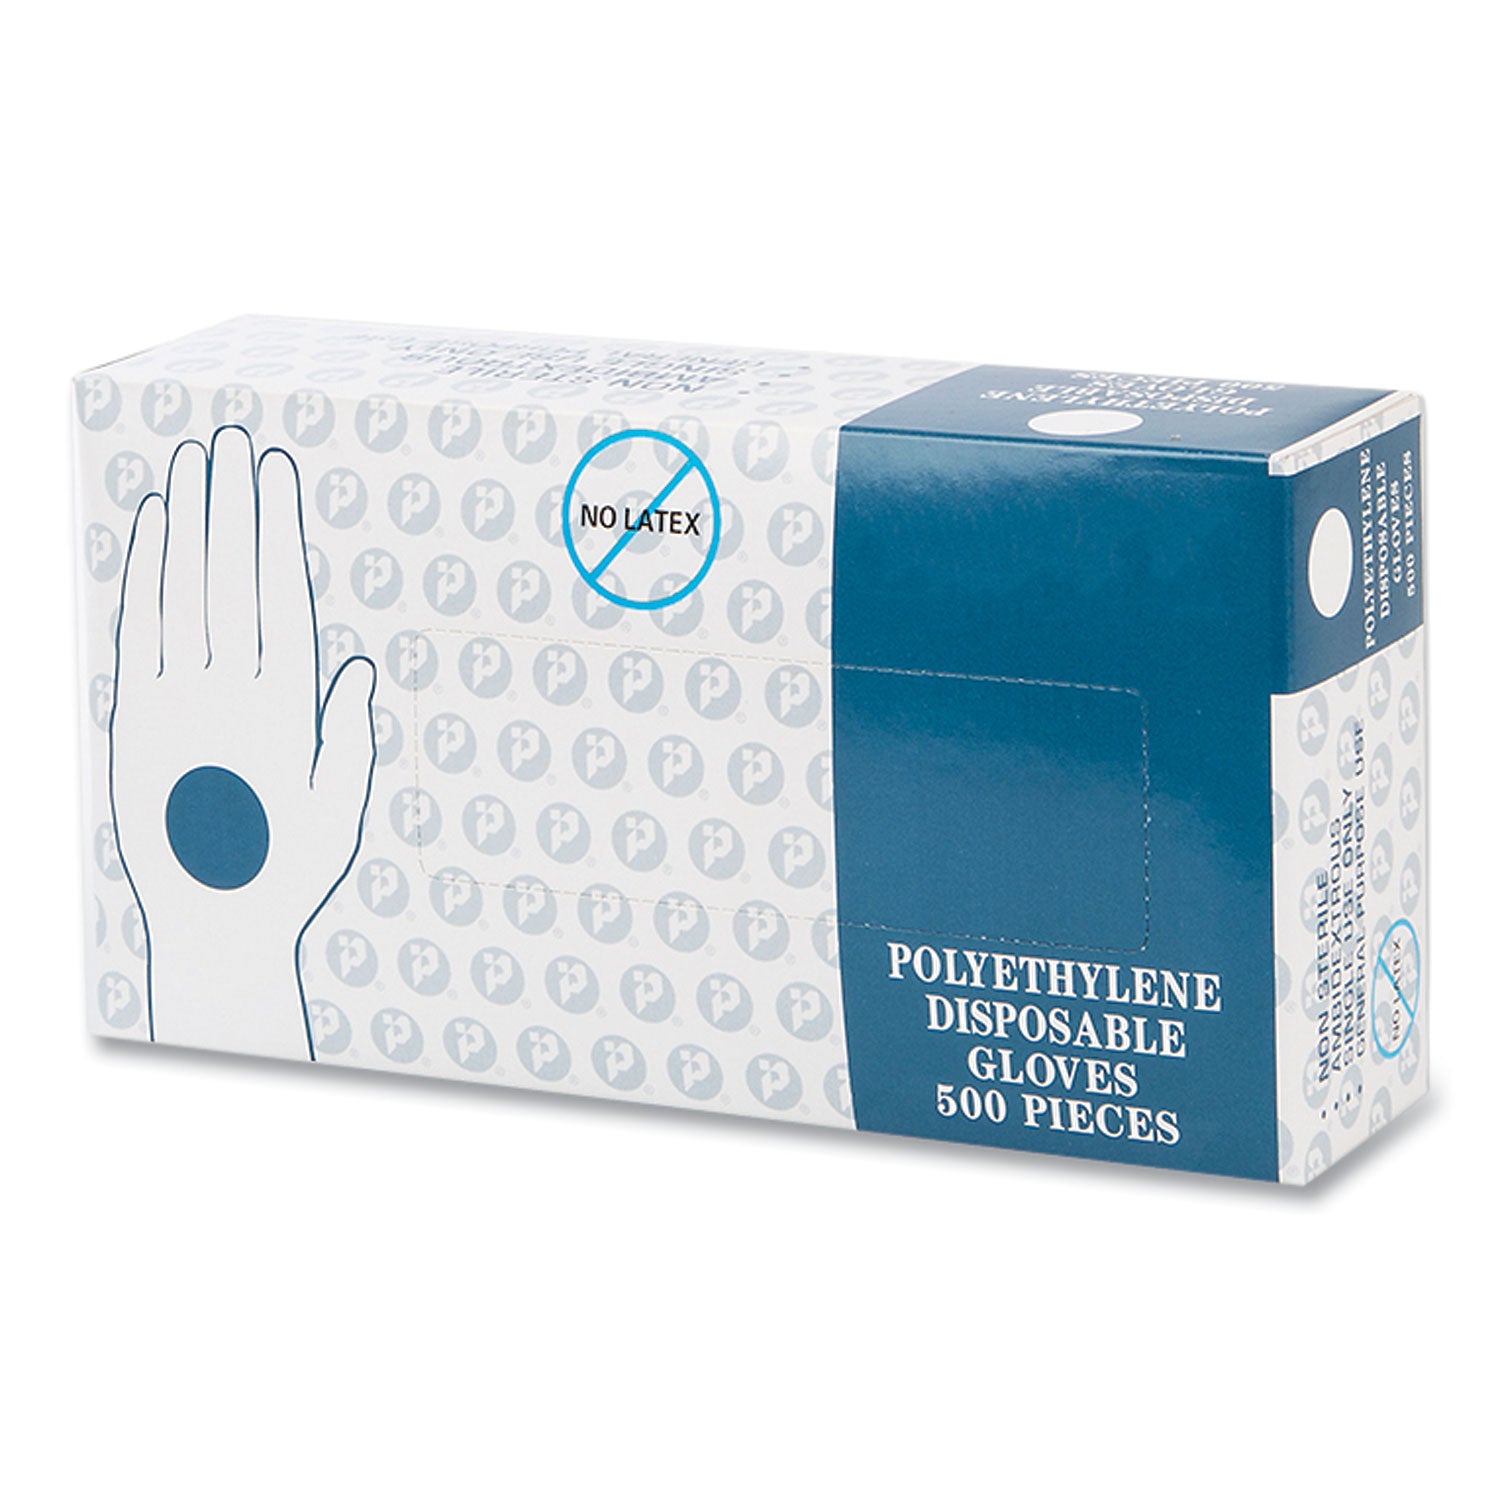 embossed-polyethylene-disposable-gloves-large-powder-free-clear-500-box-4-boxes-carton_ibsgllg2k - 2